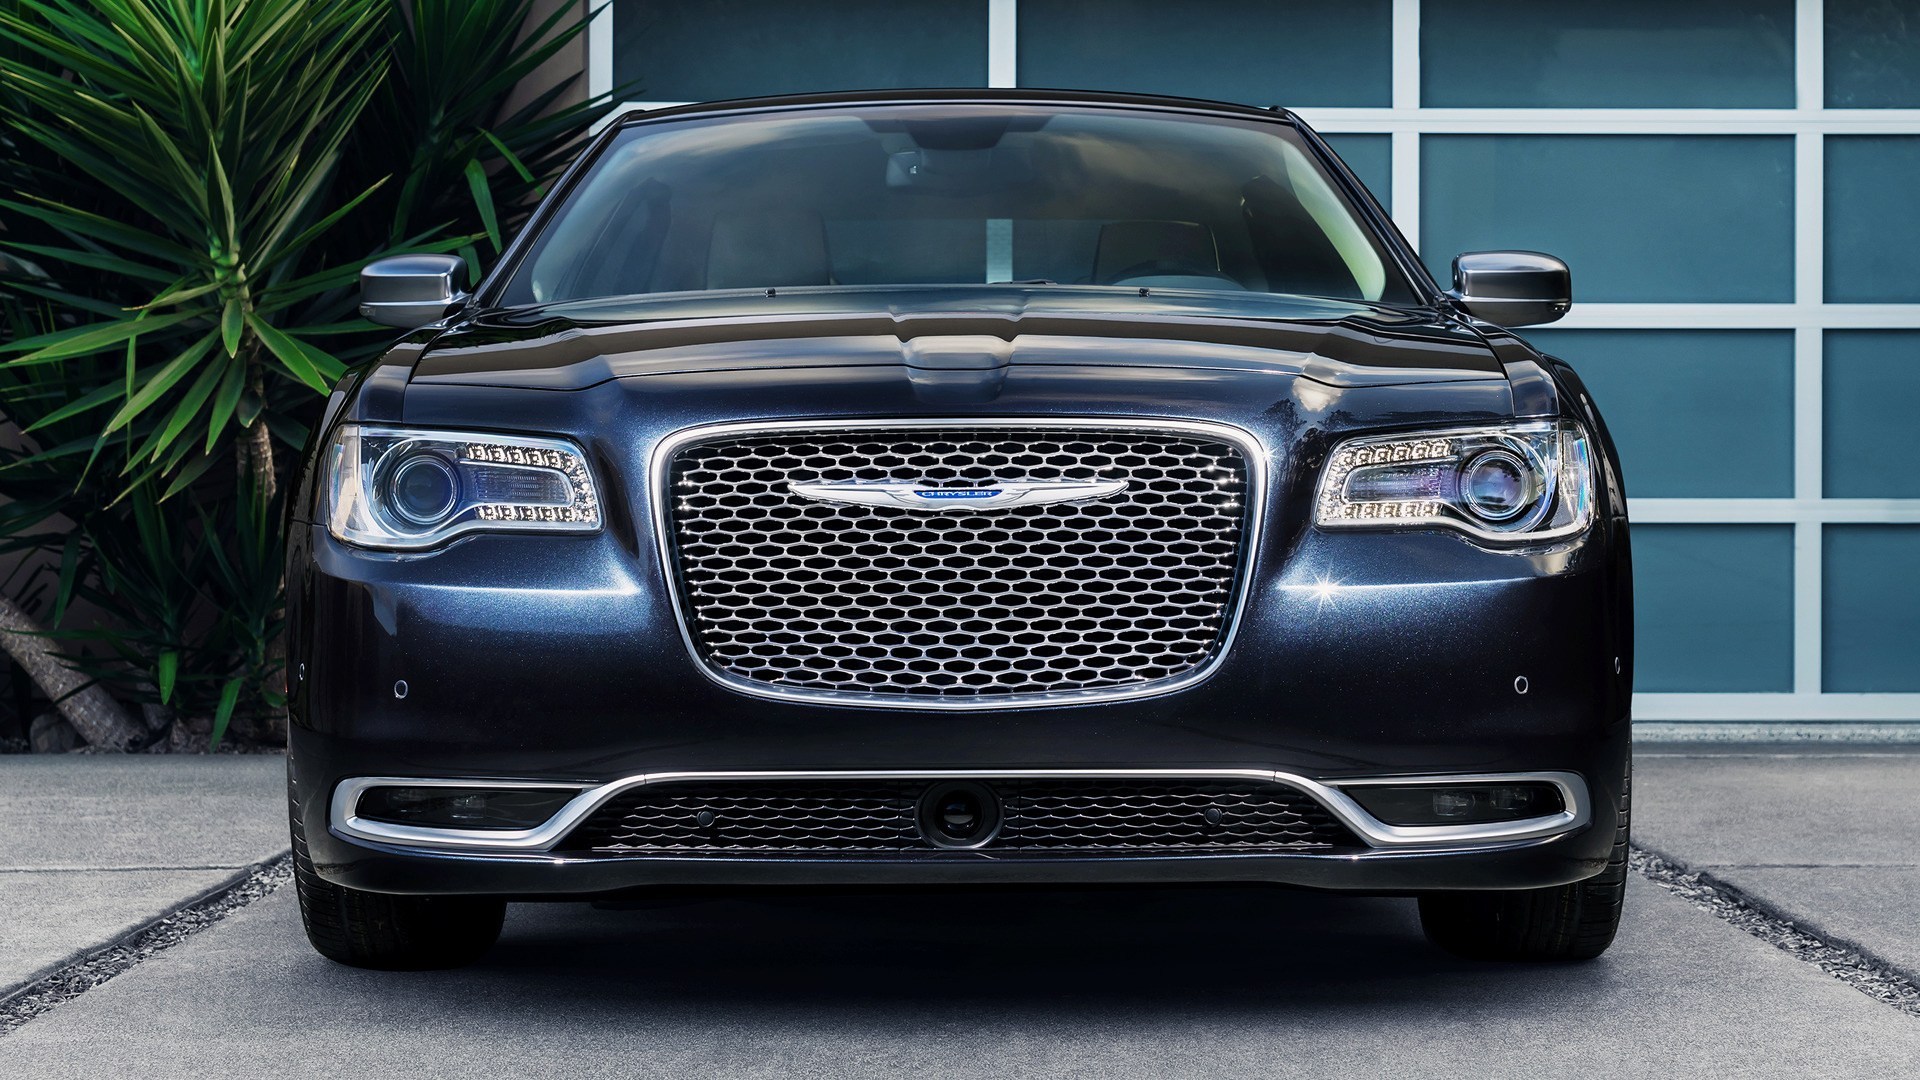 Chrysler 300c Platinum 2015 Wallpapers And Hd Images - 2017 Chrysler 300 Front , HD Wallpaper & Backgrounds